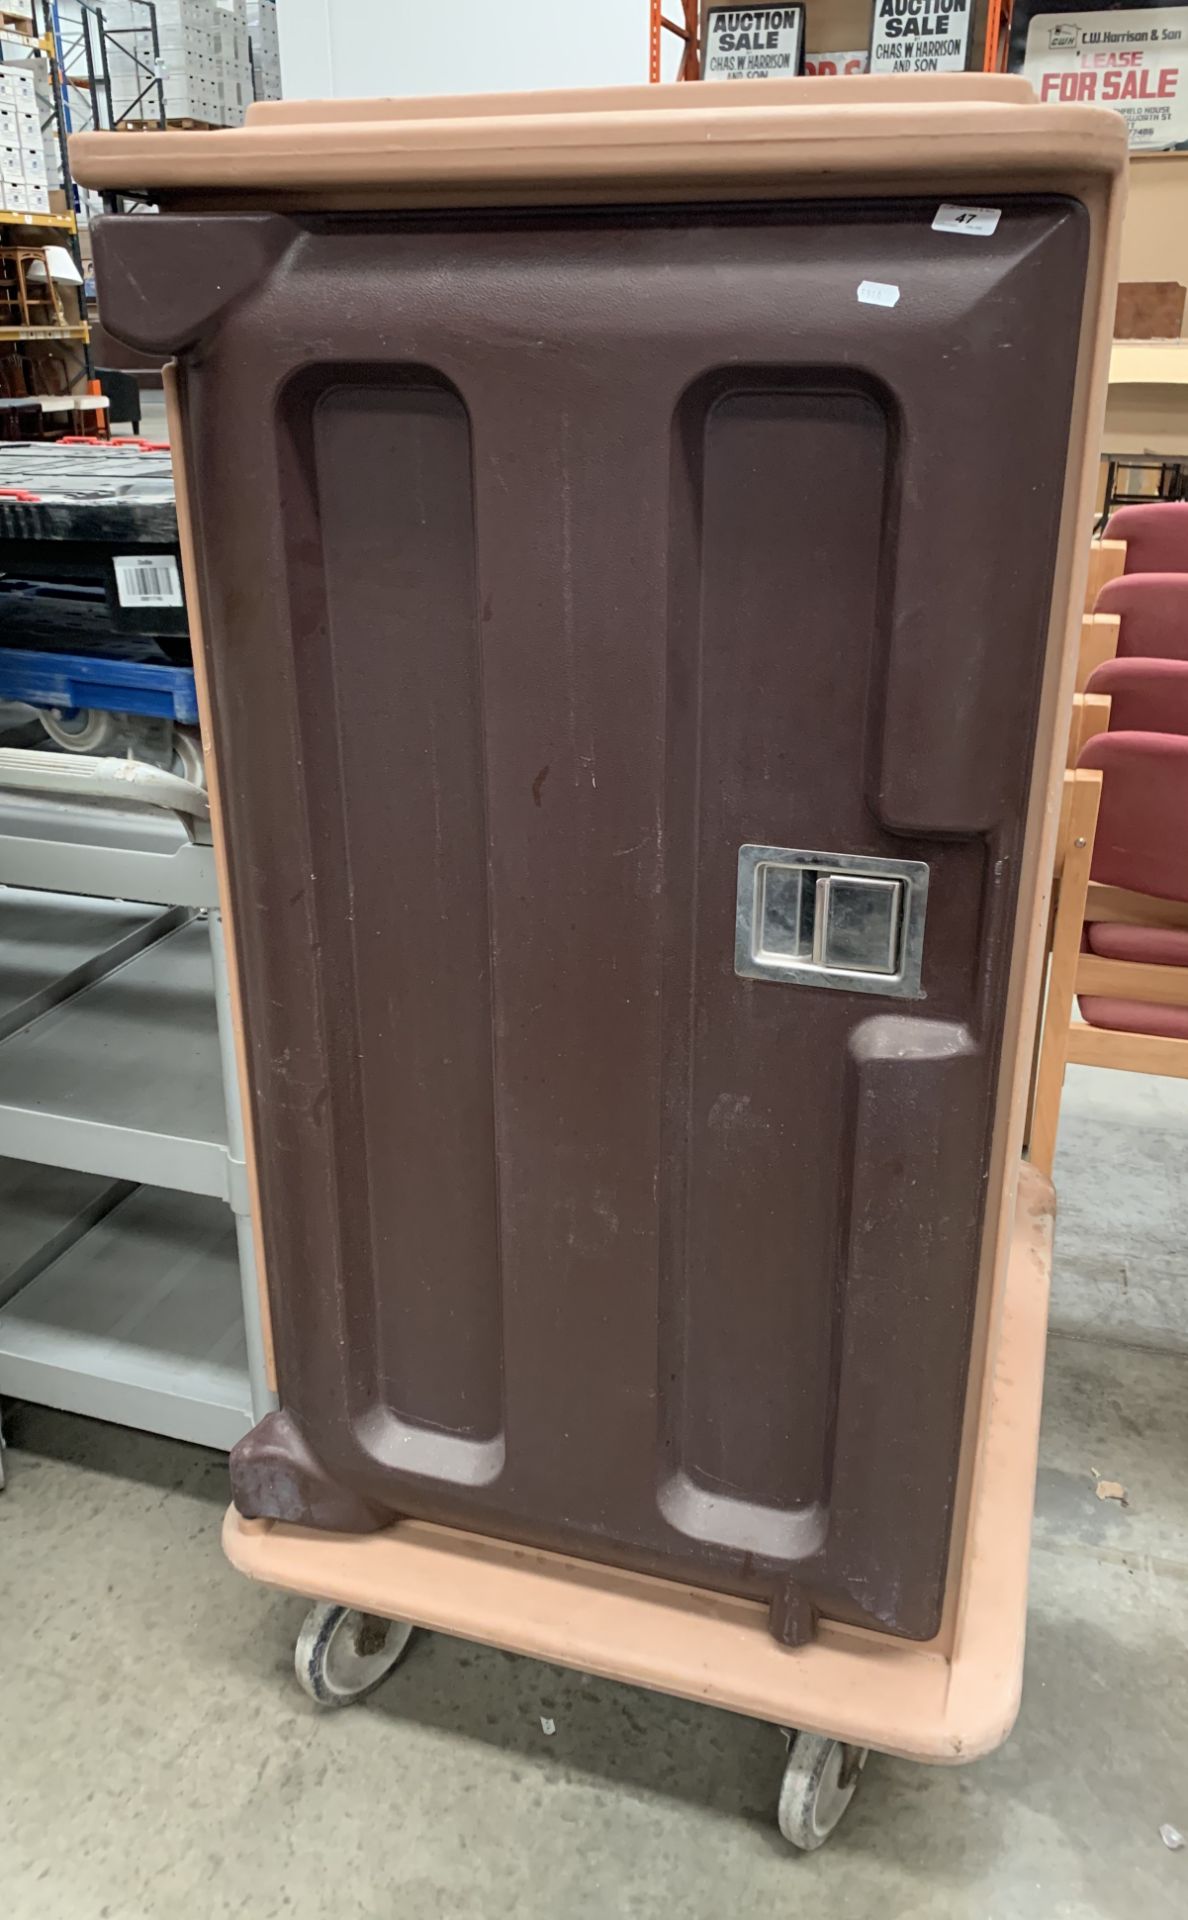 A two-tone brown moulded plastic insulat - Image 2 of 2